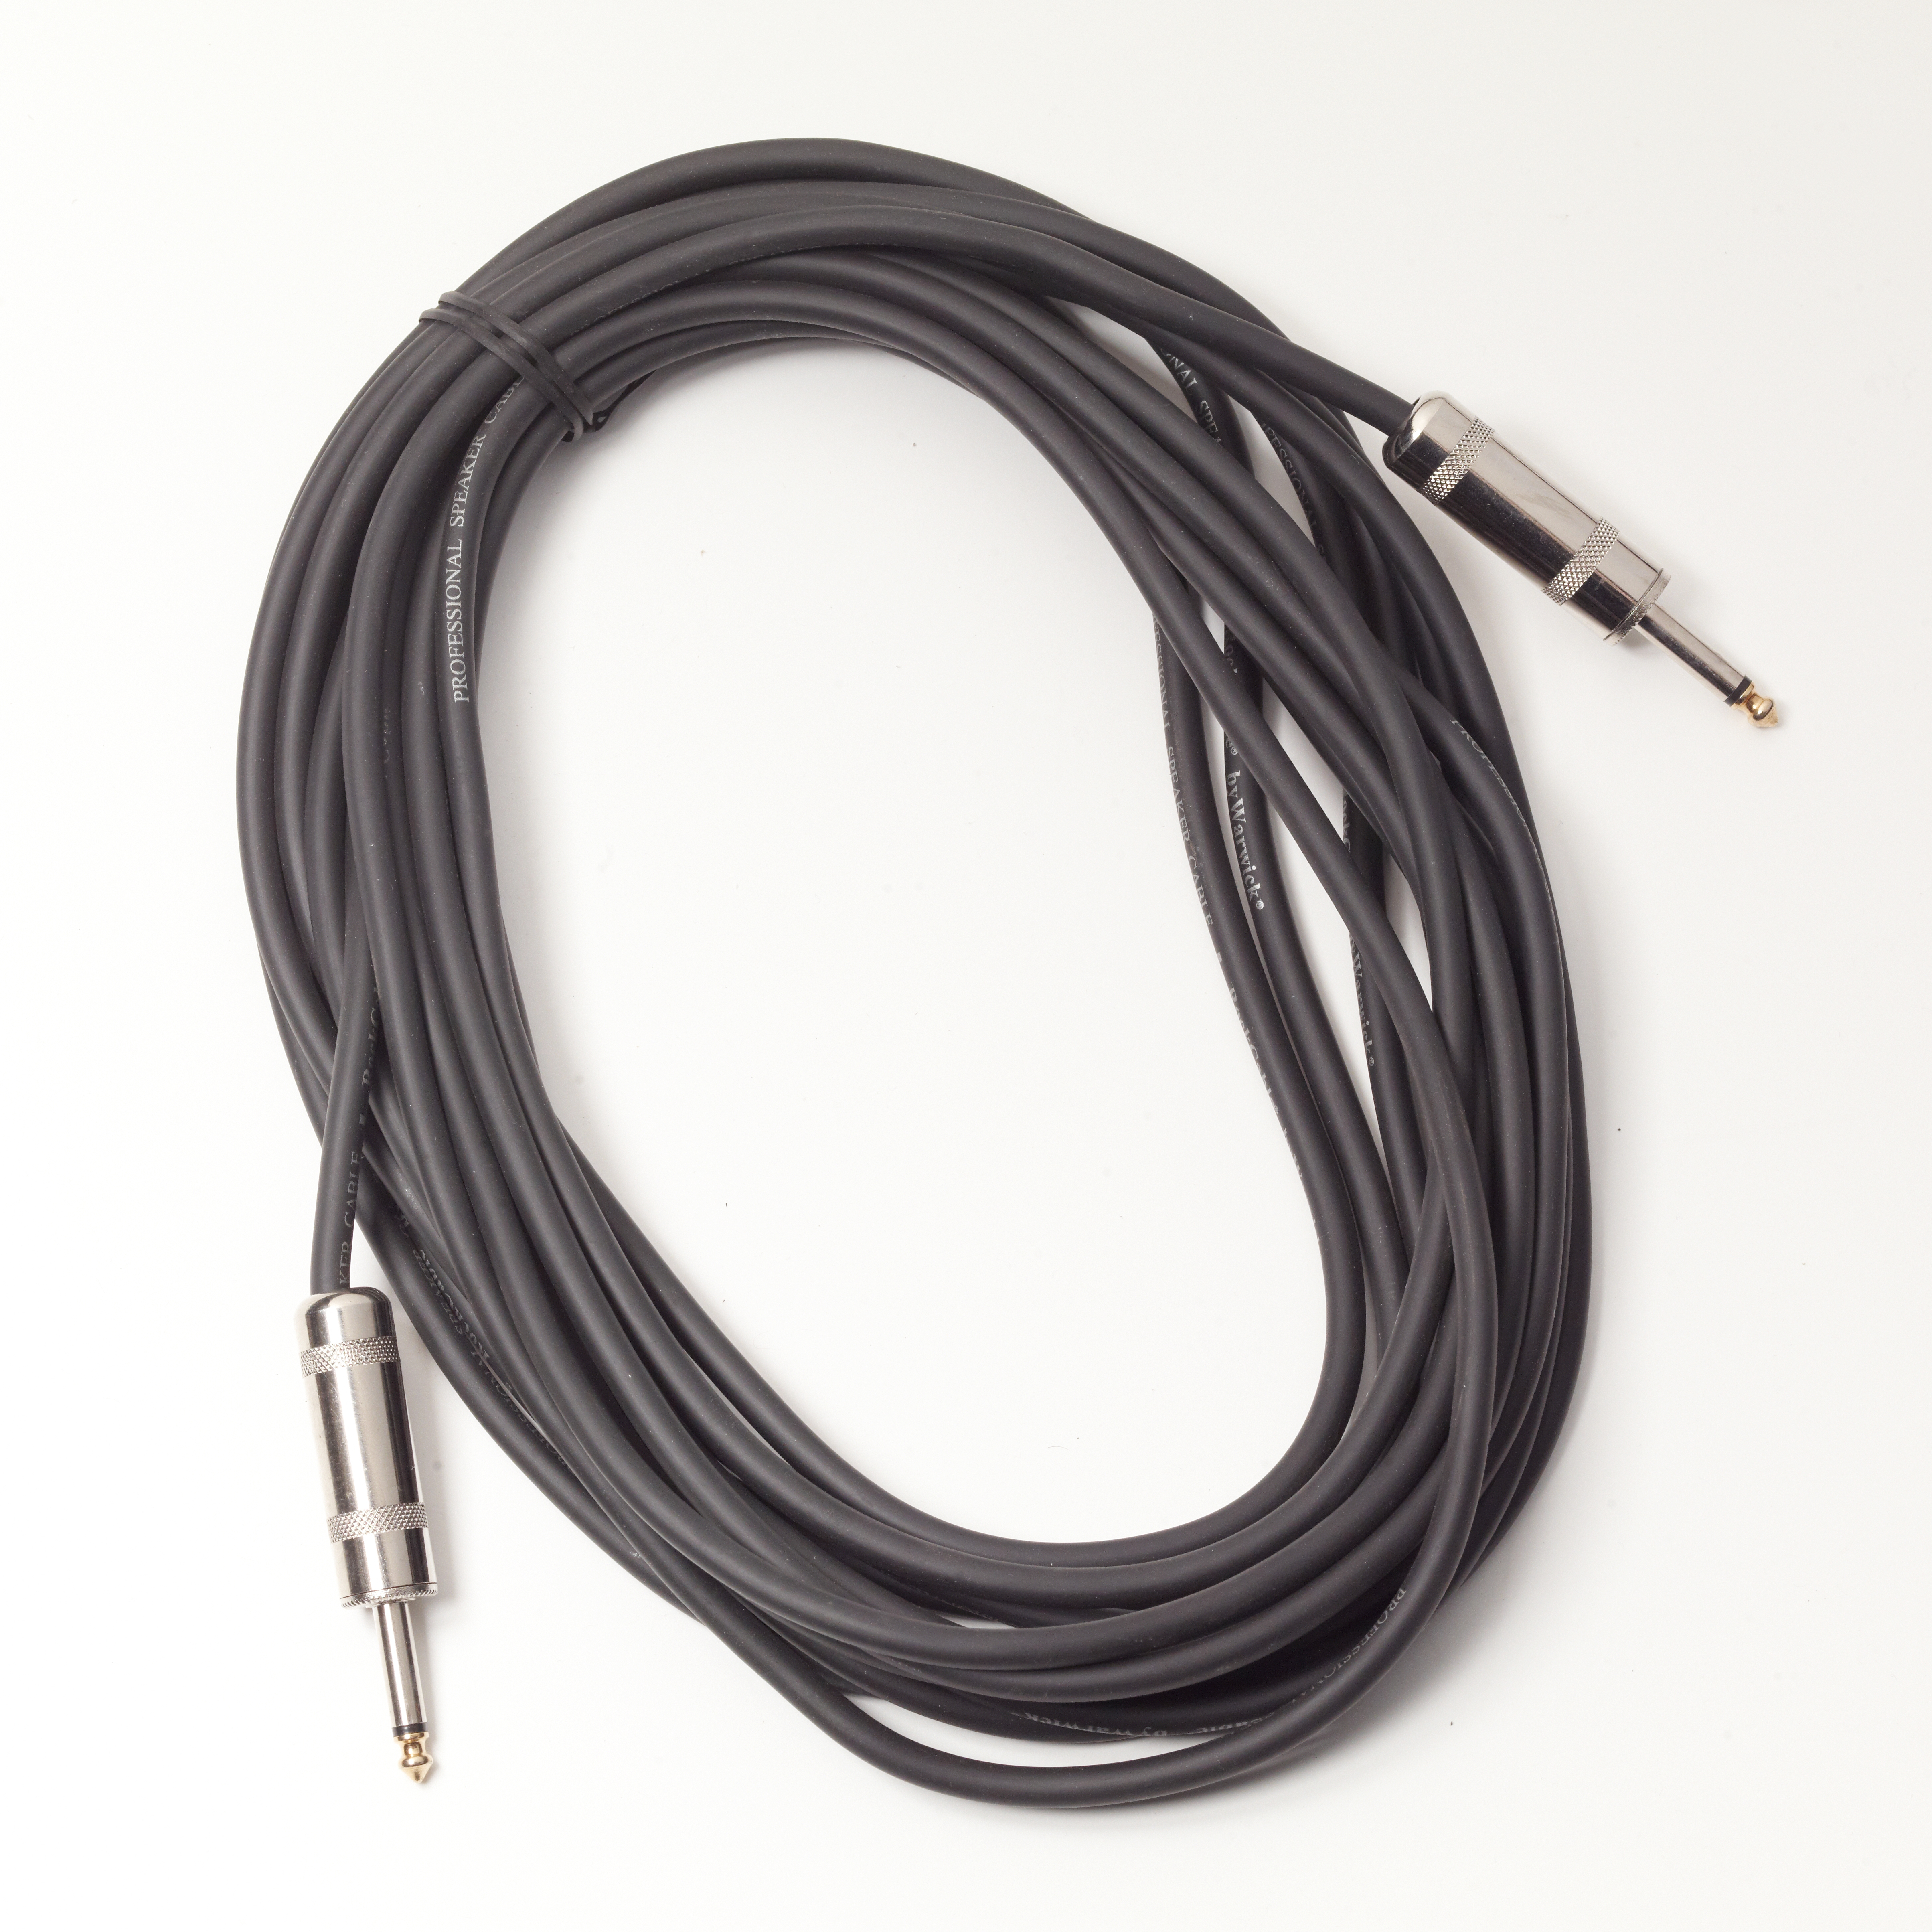 RockCable Speaker Cable - straight TS (6.3 mm / 1/4") - 10 m / 32.8 ft, 7 mm